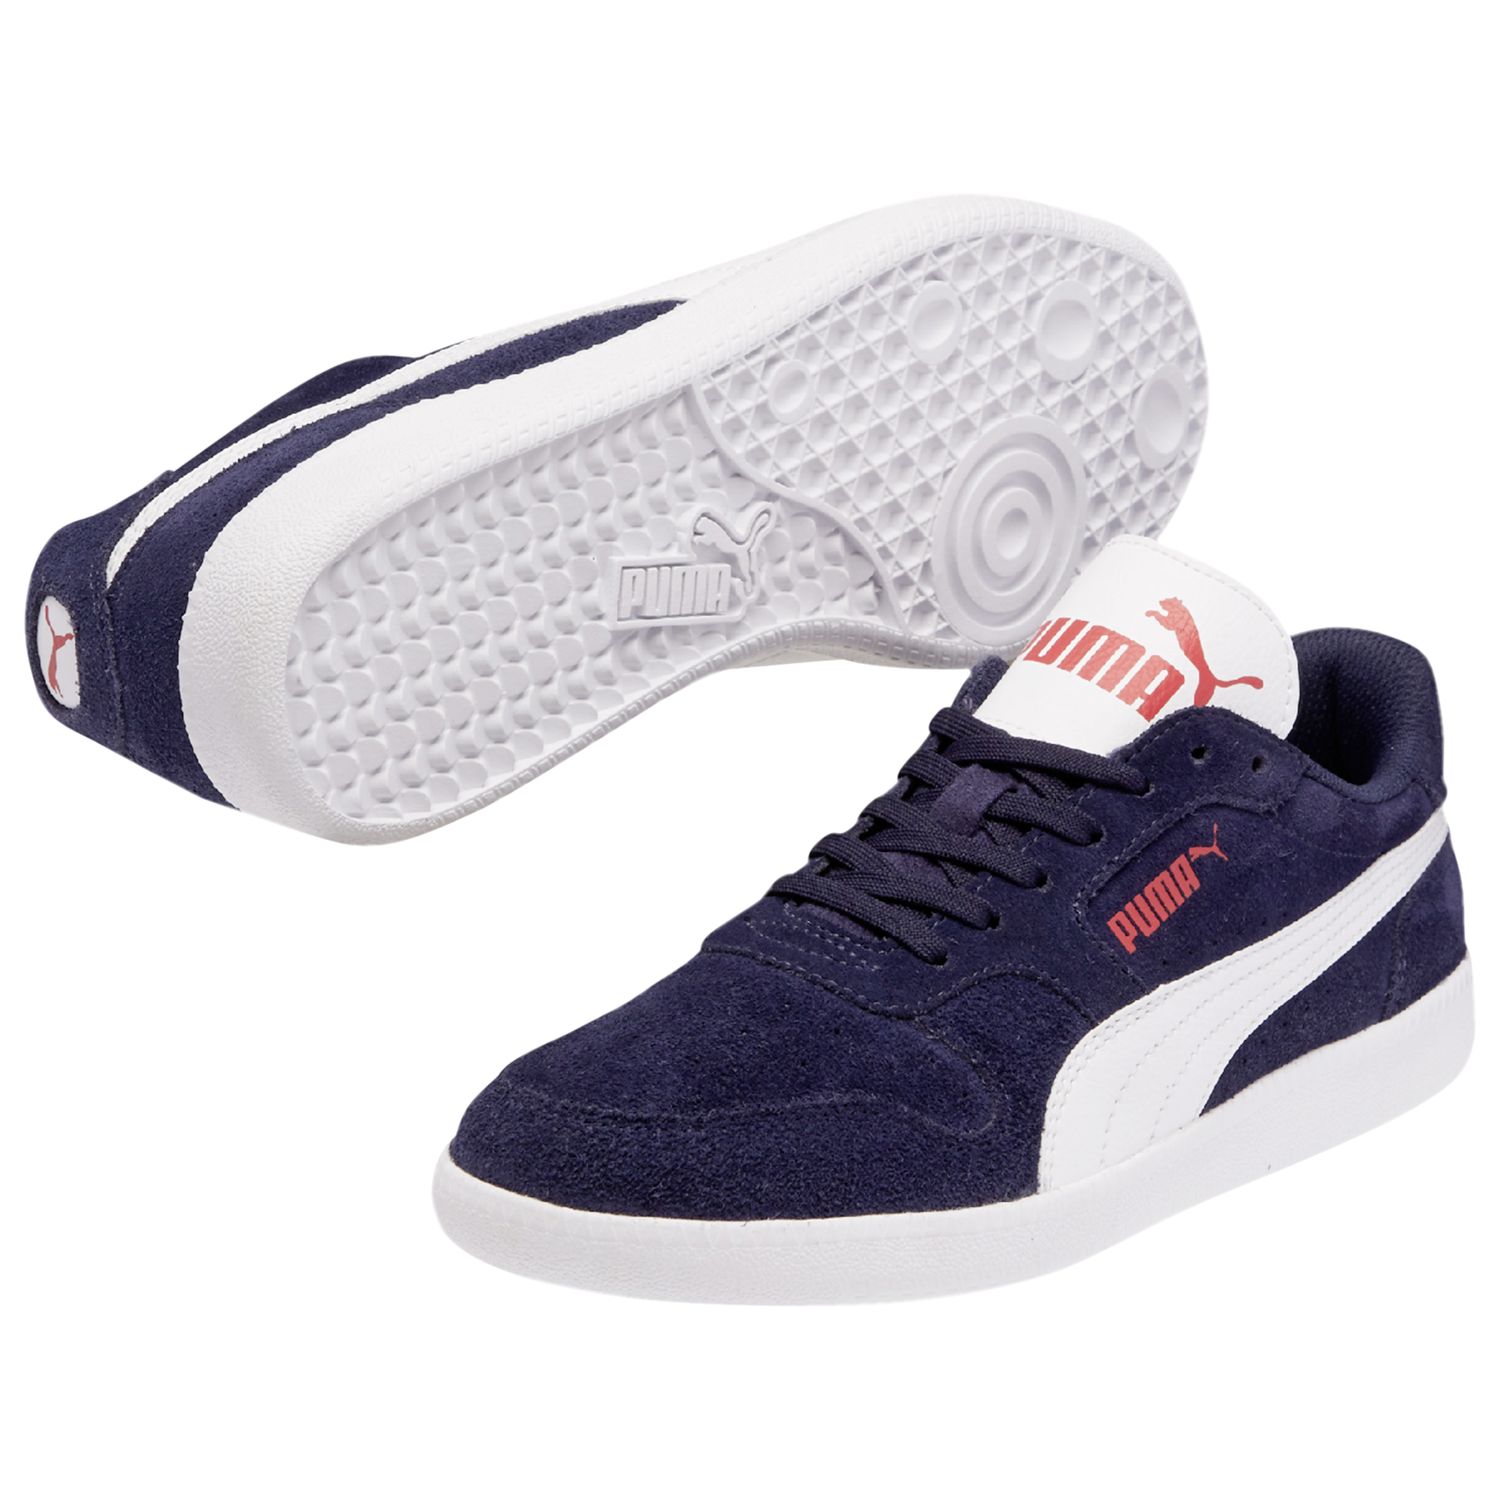 Puma Icra Suede Trainers at John Lewis 